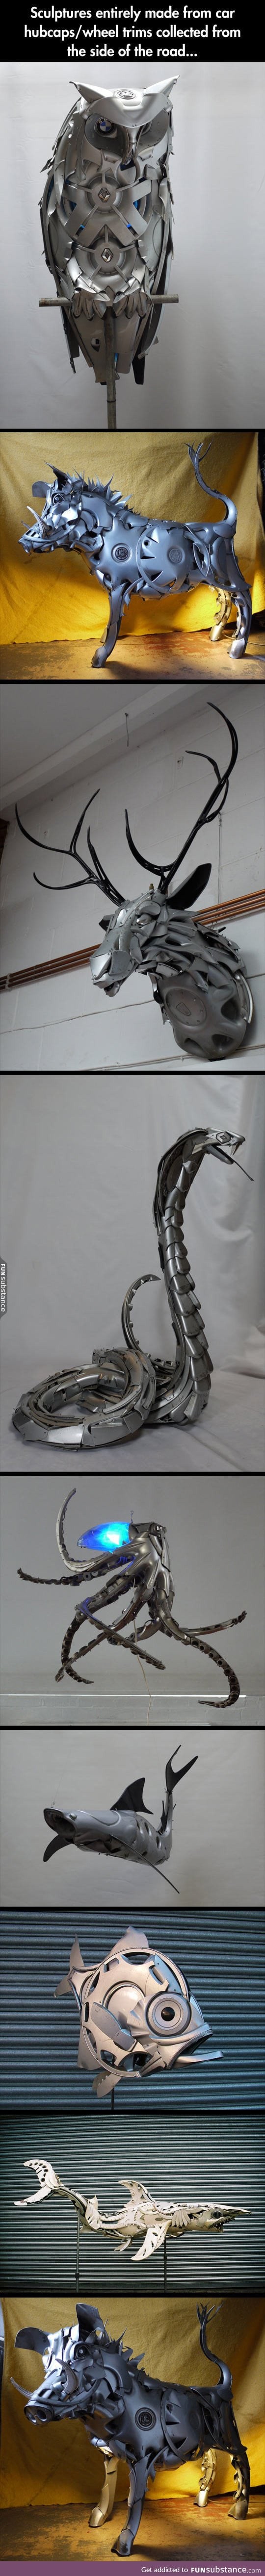 Epic sculptures made with car parts